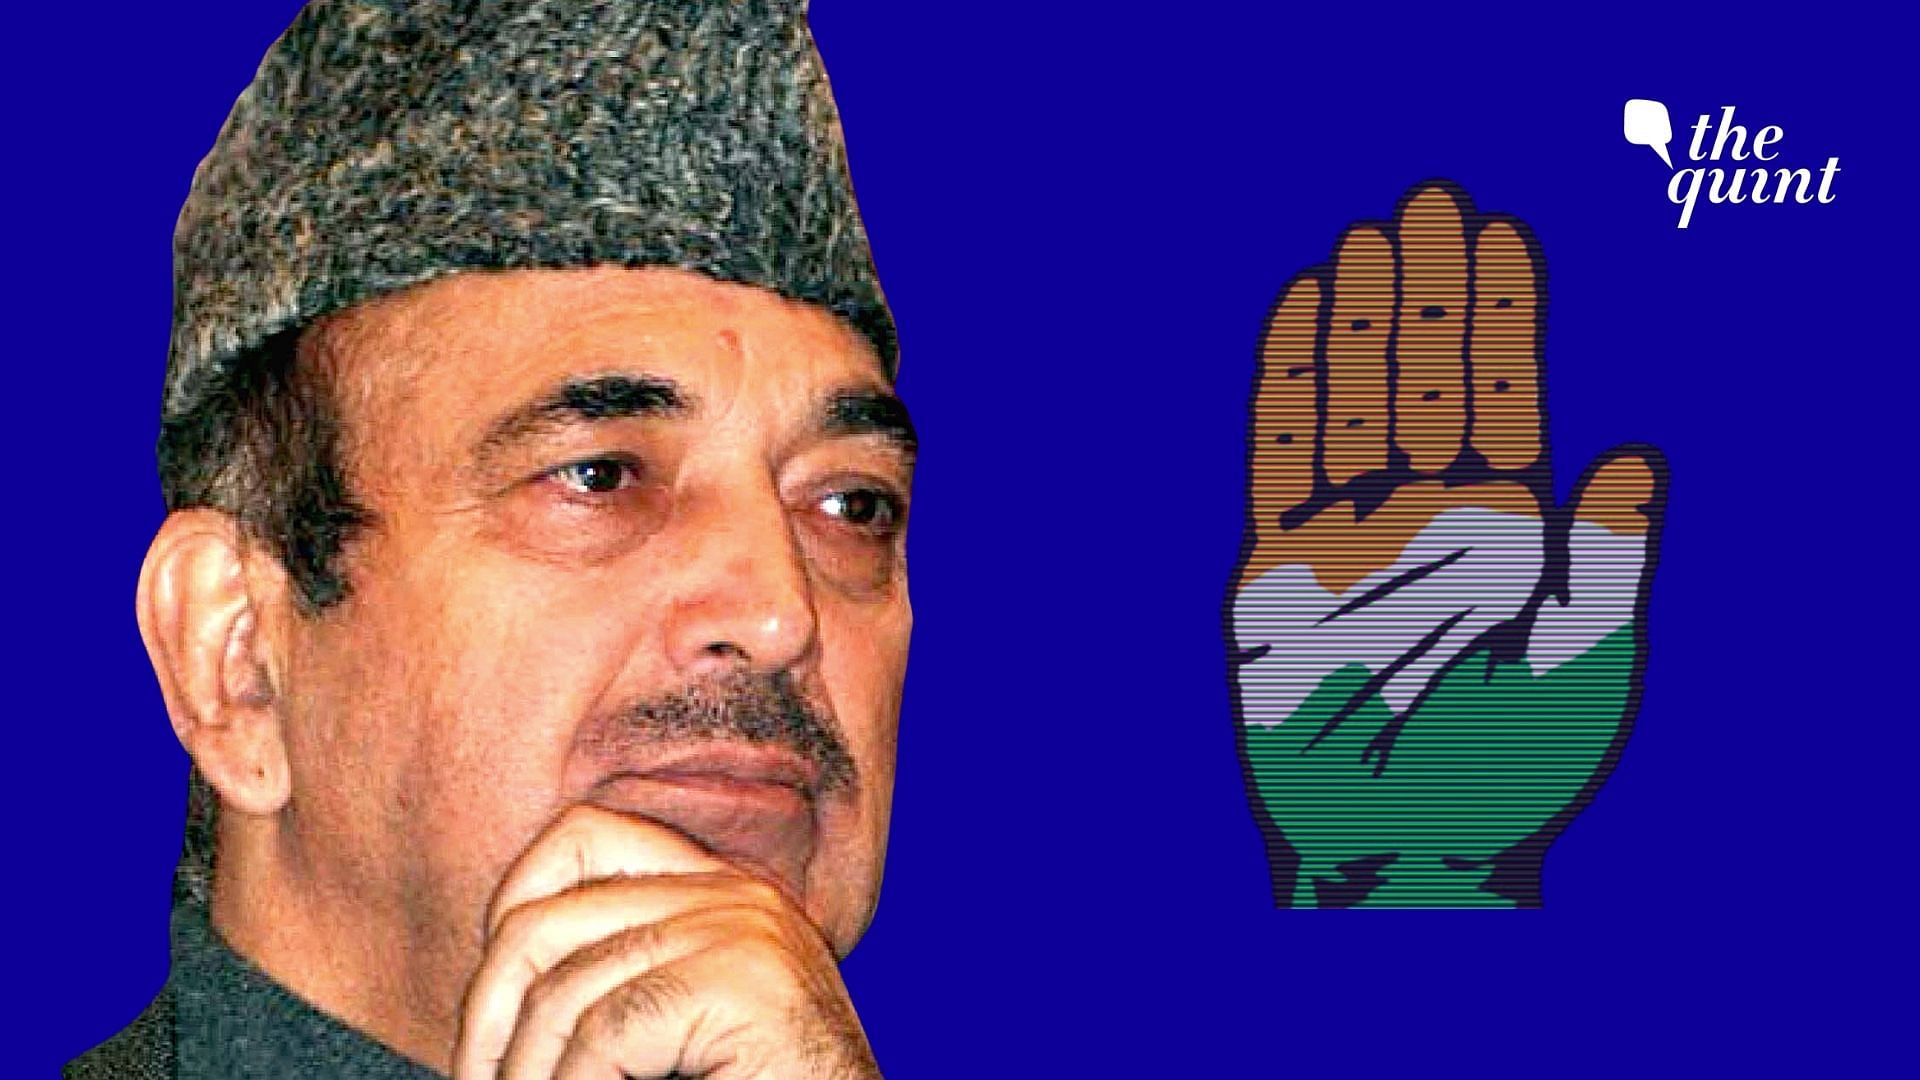 In a major rehaul, veteran Congress leaders Ghulam Nabi Azad on Friday, 11 September was dropped as the party general secretary.